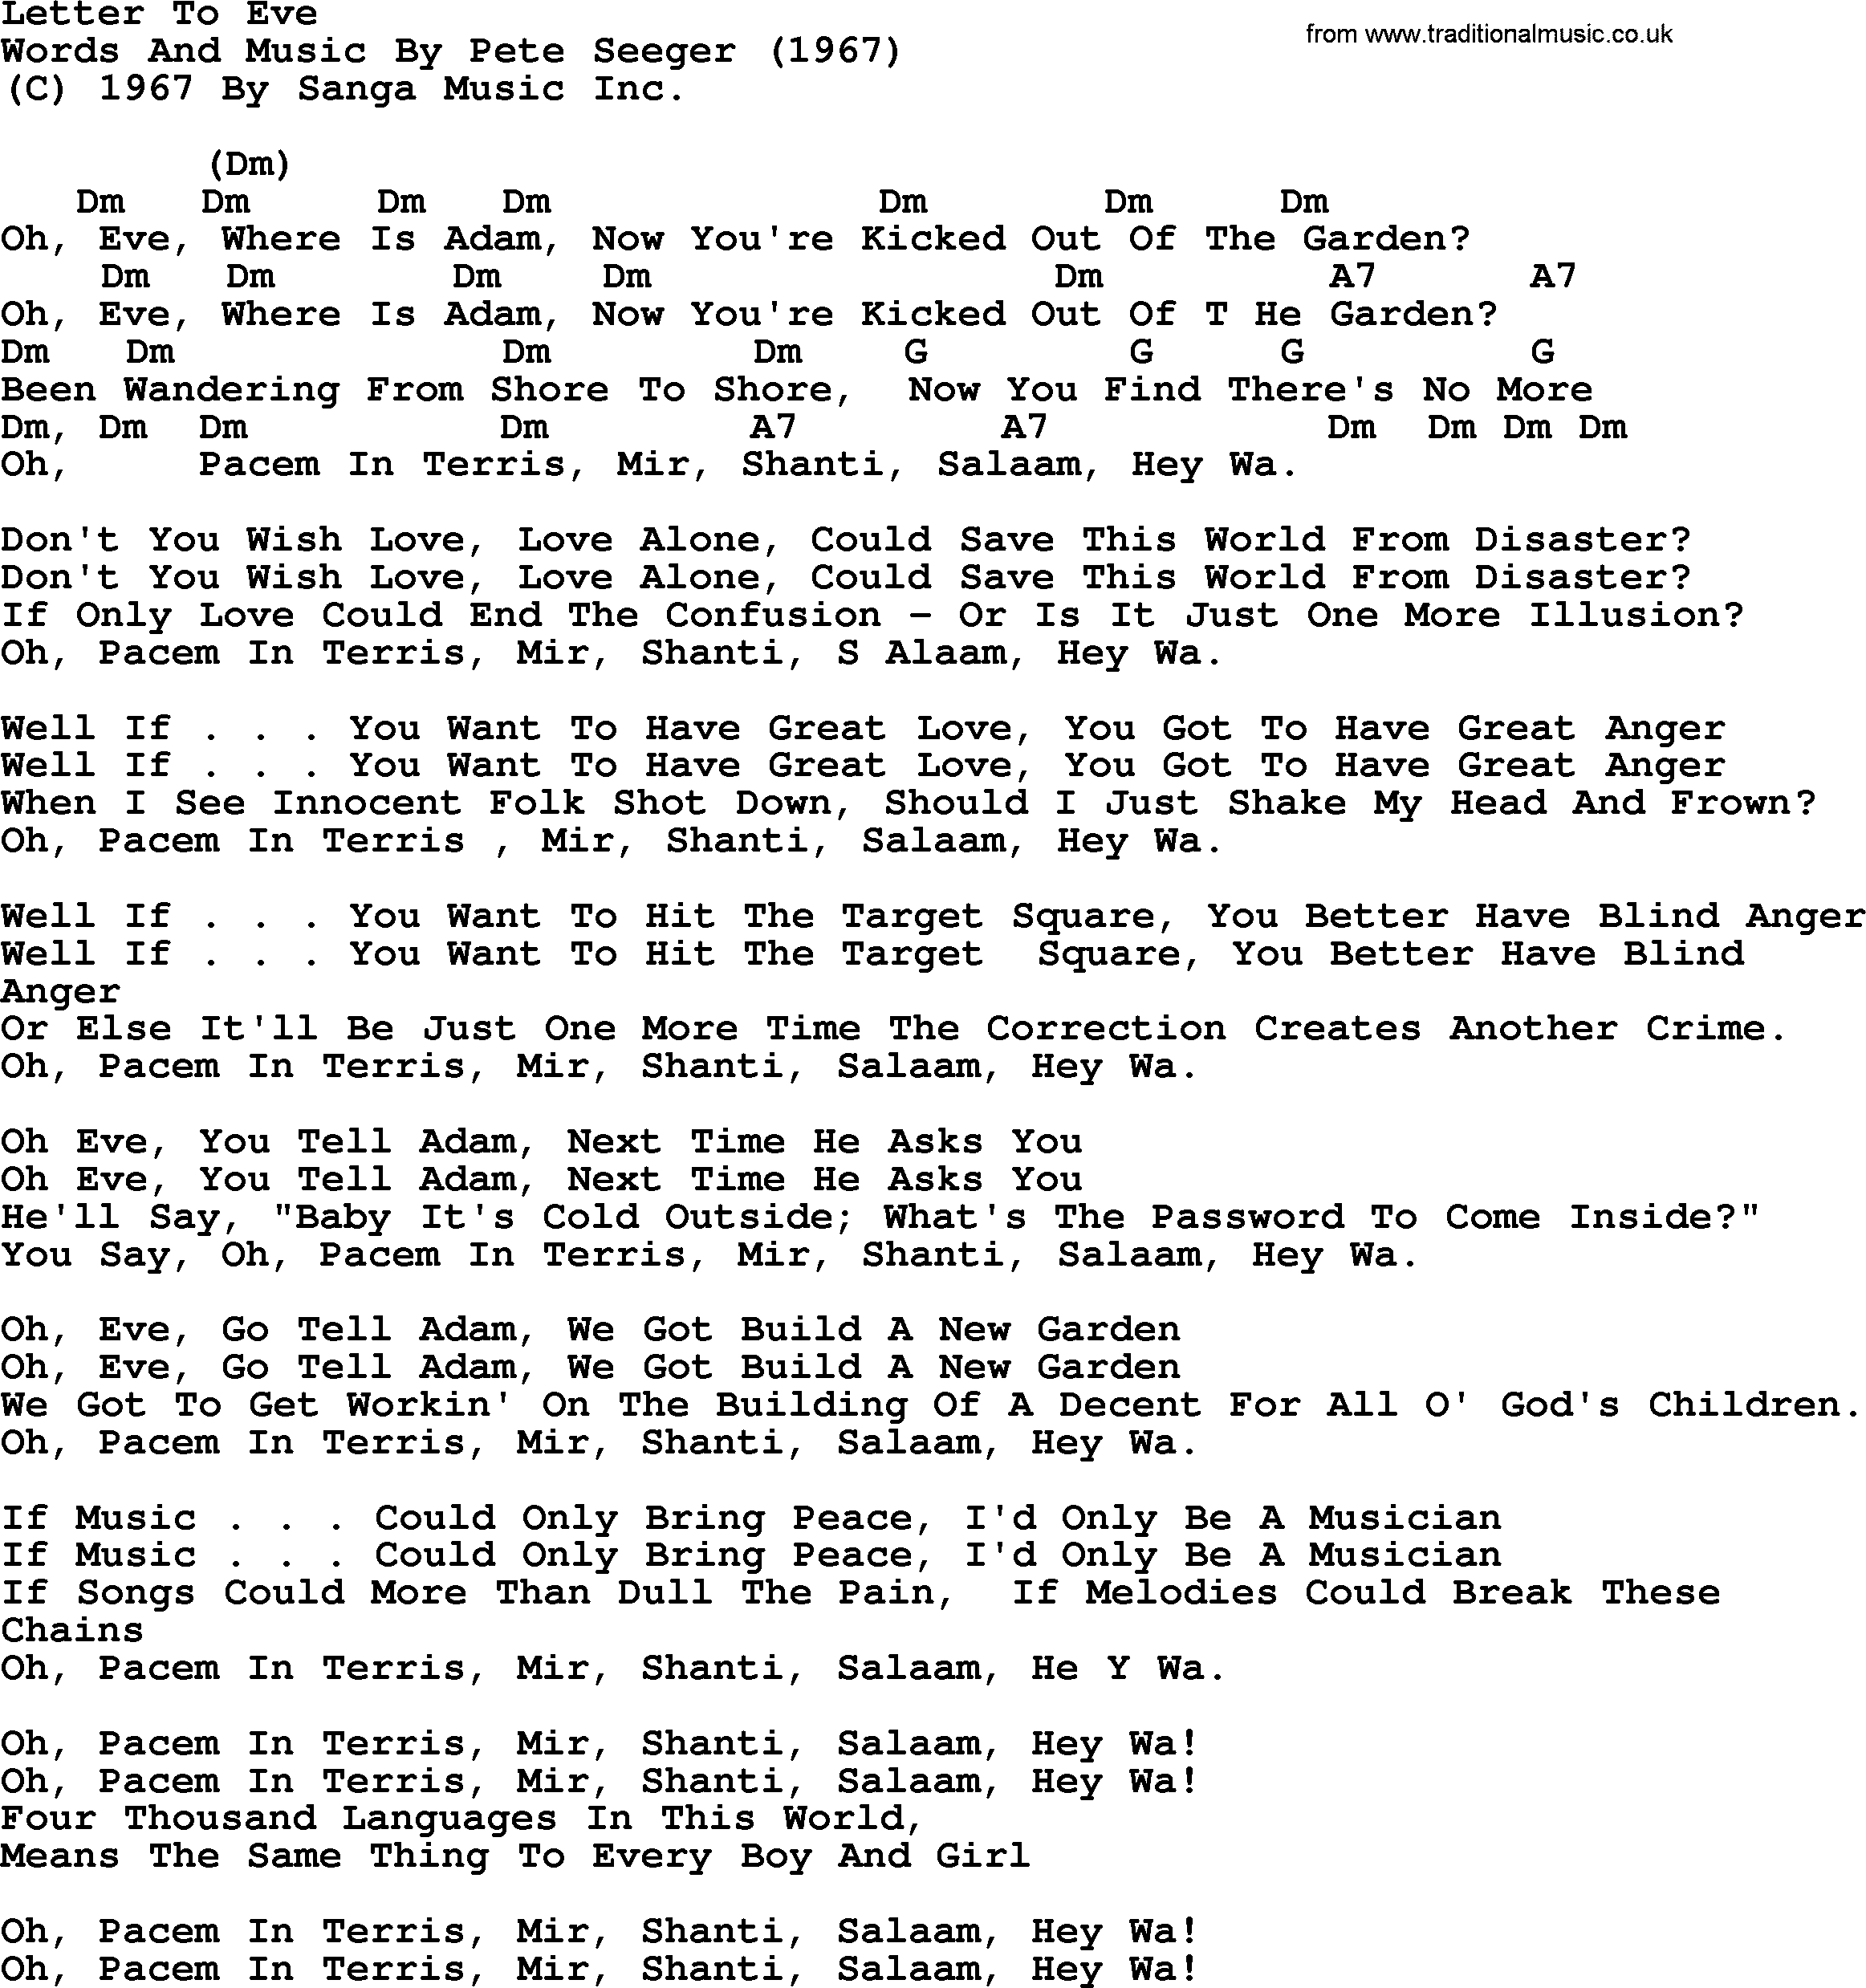 Pete Seeger song Letter To Eve, lyrics and chords